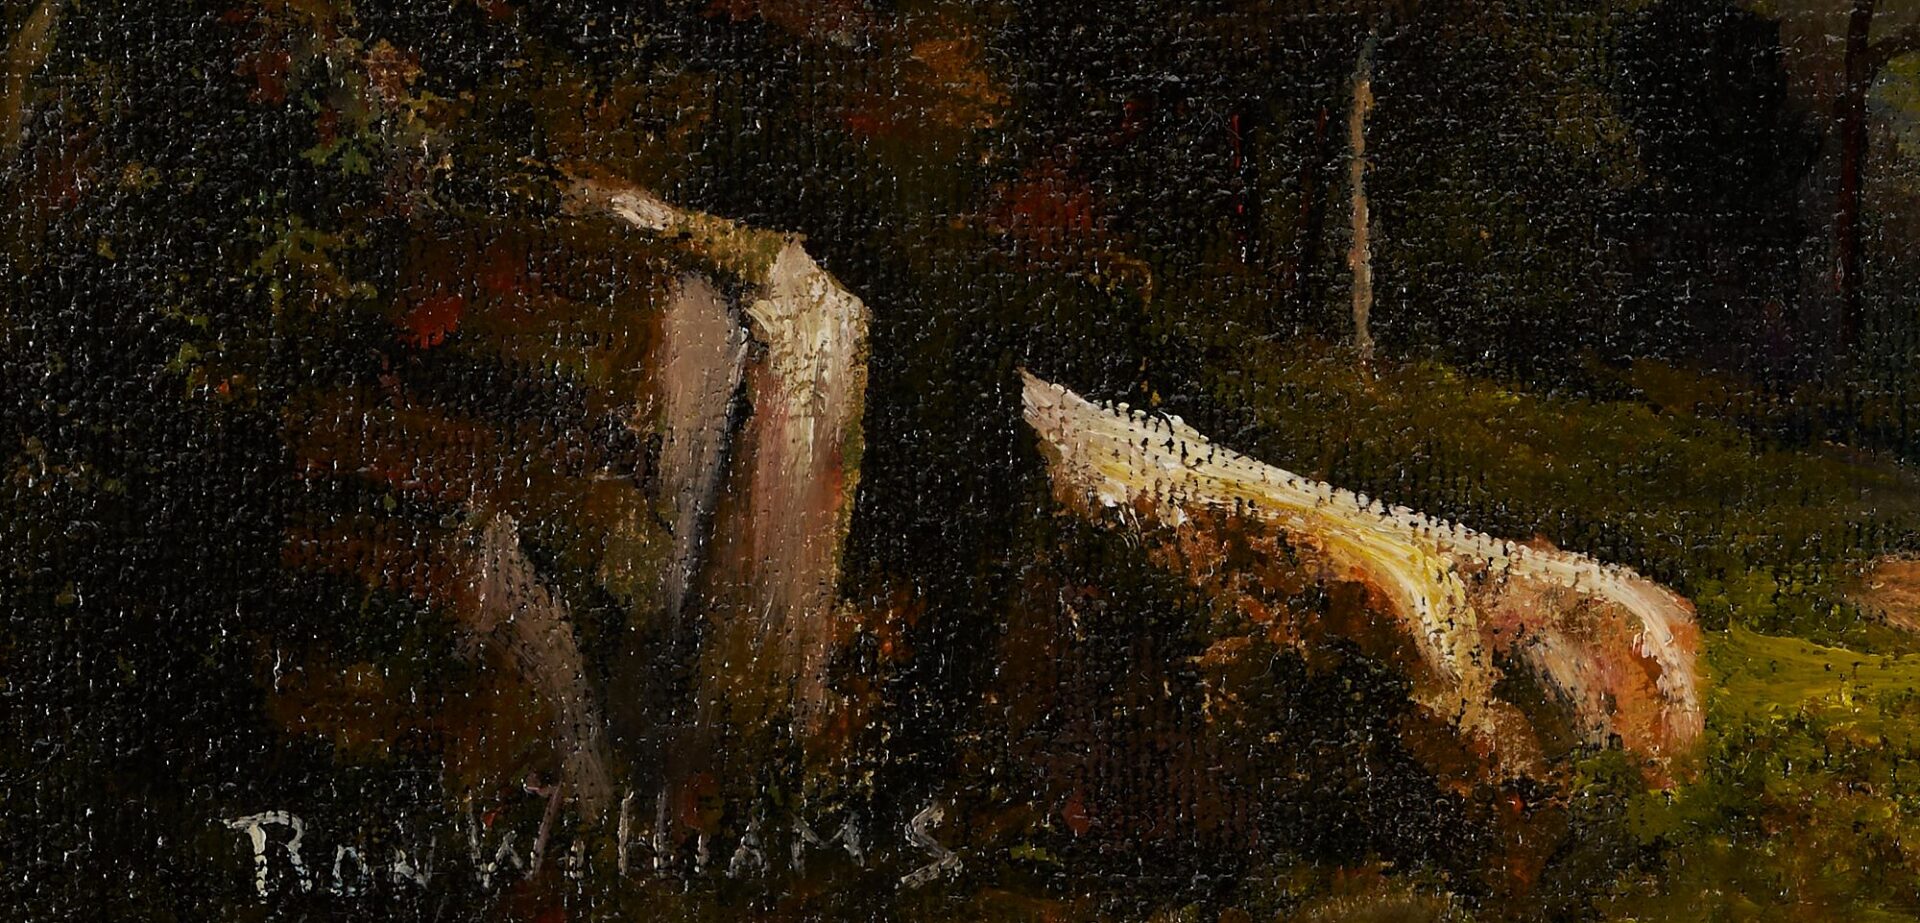 Lot 1014: Ron Williams O/C Landscape Painting with Path